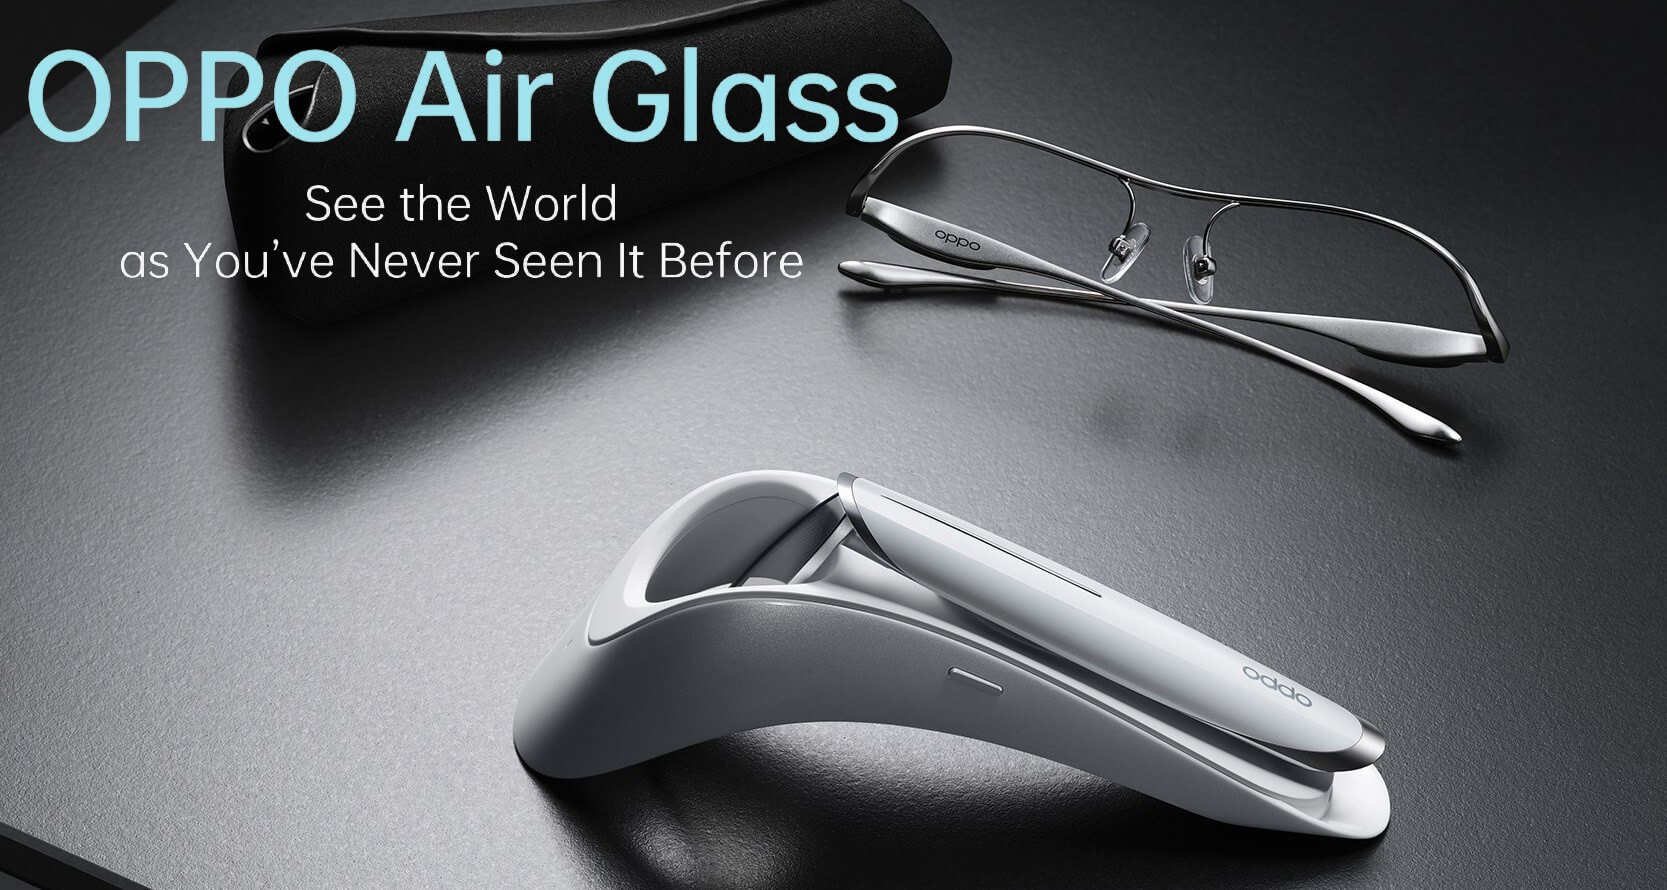 OPPO Air Glass launch cn